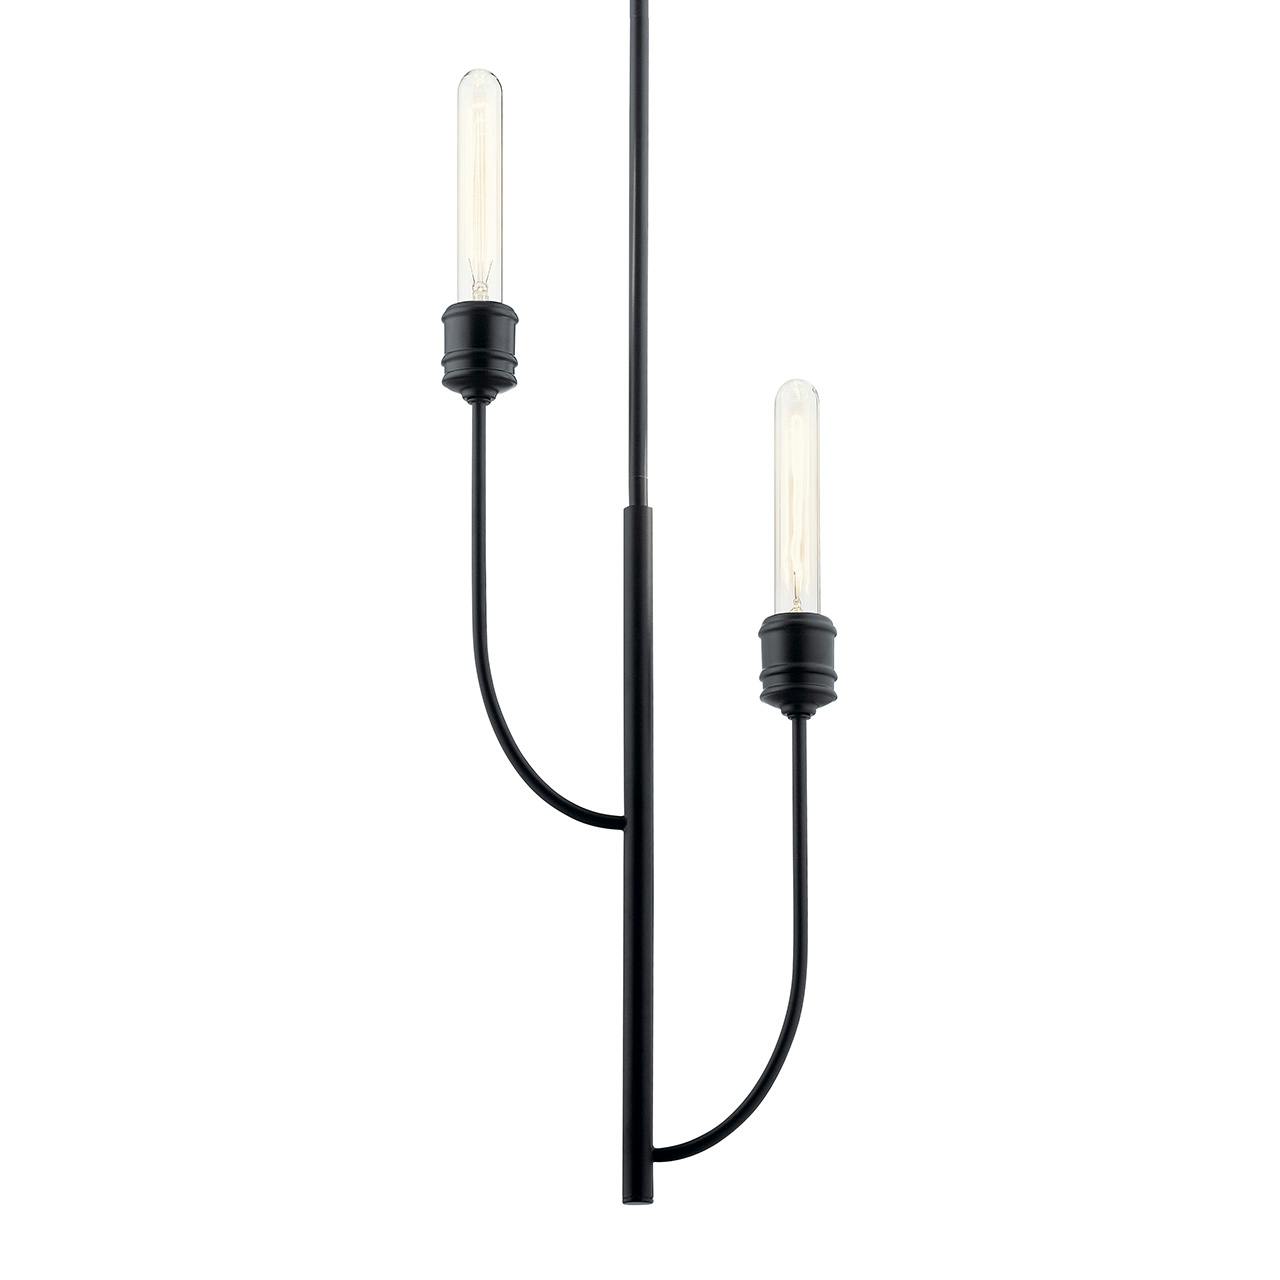 Hatton 2 Light Pendant in Black without the canopy on a white background